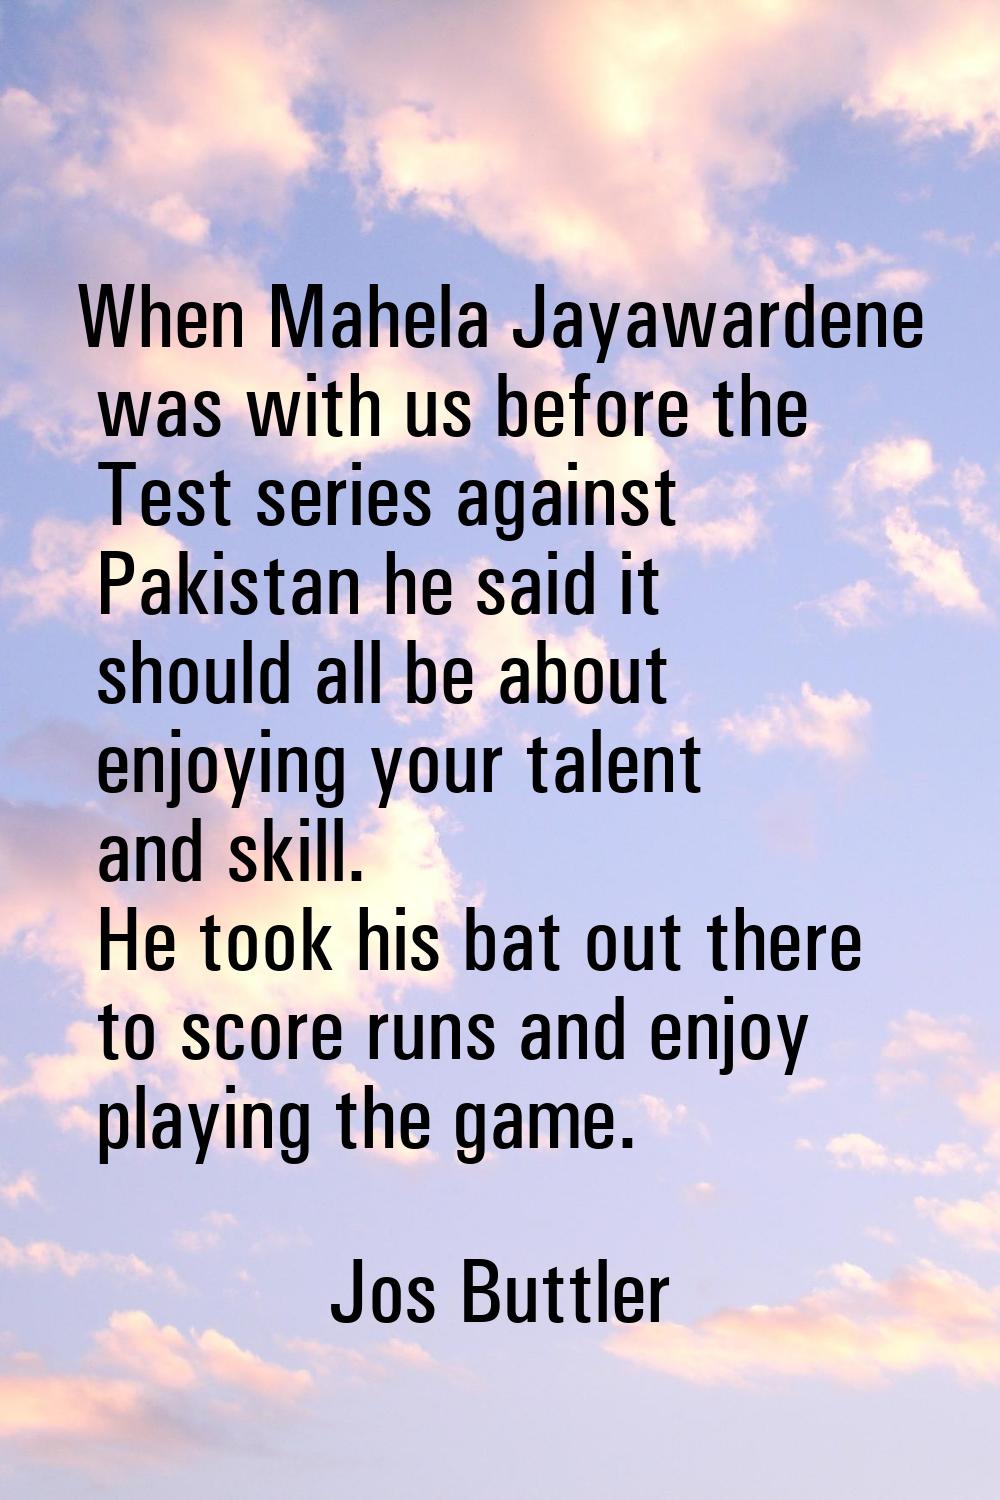 When Mahela Jayawardene was with us before the Test series against Pakistan he said it should all b